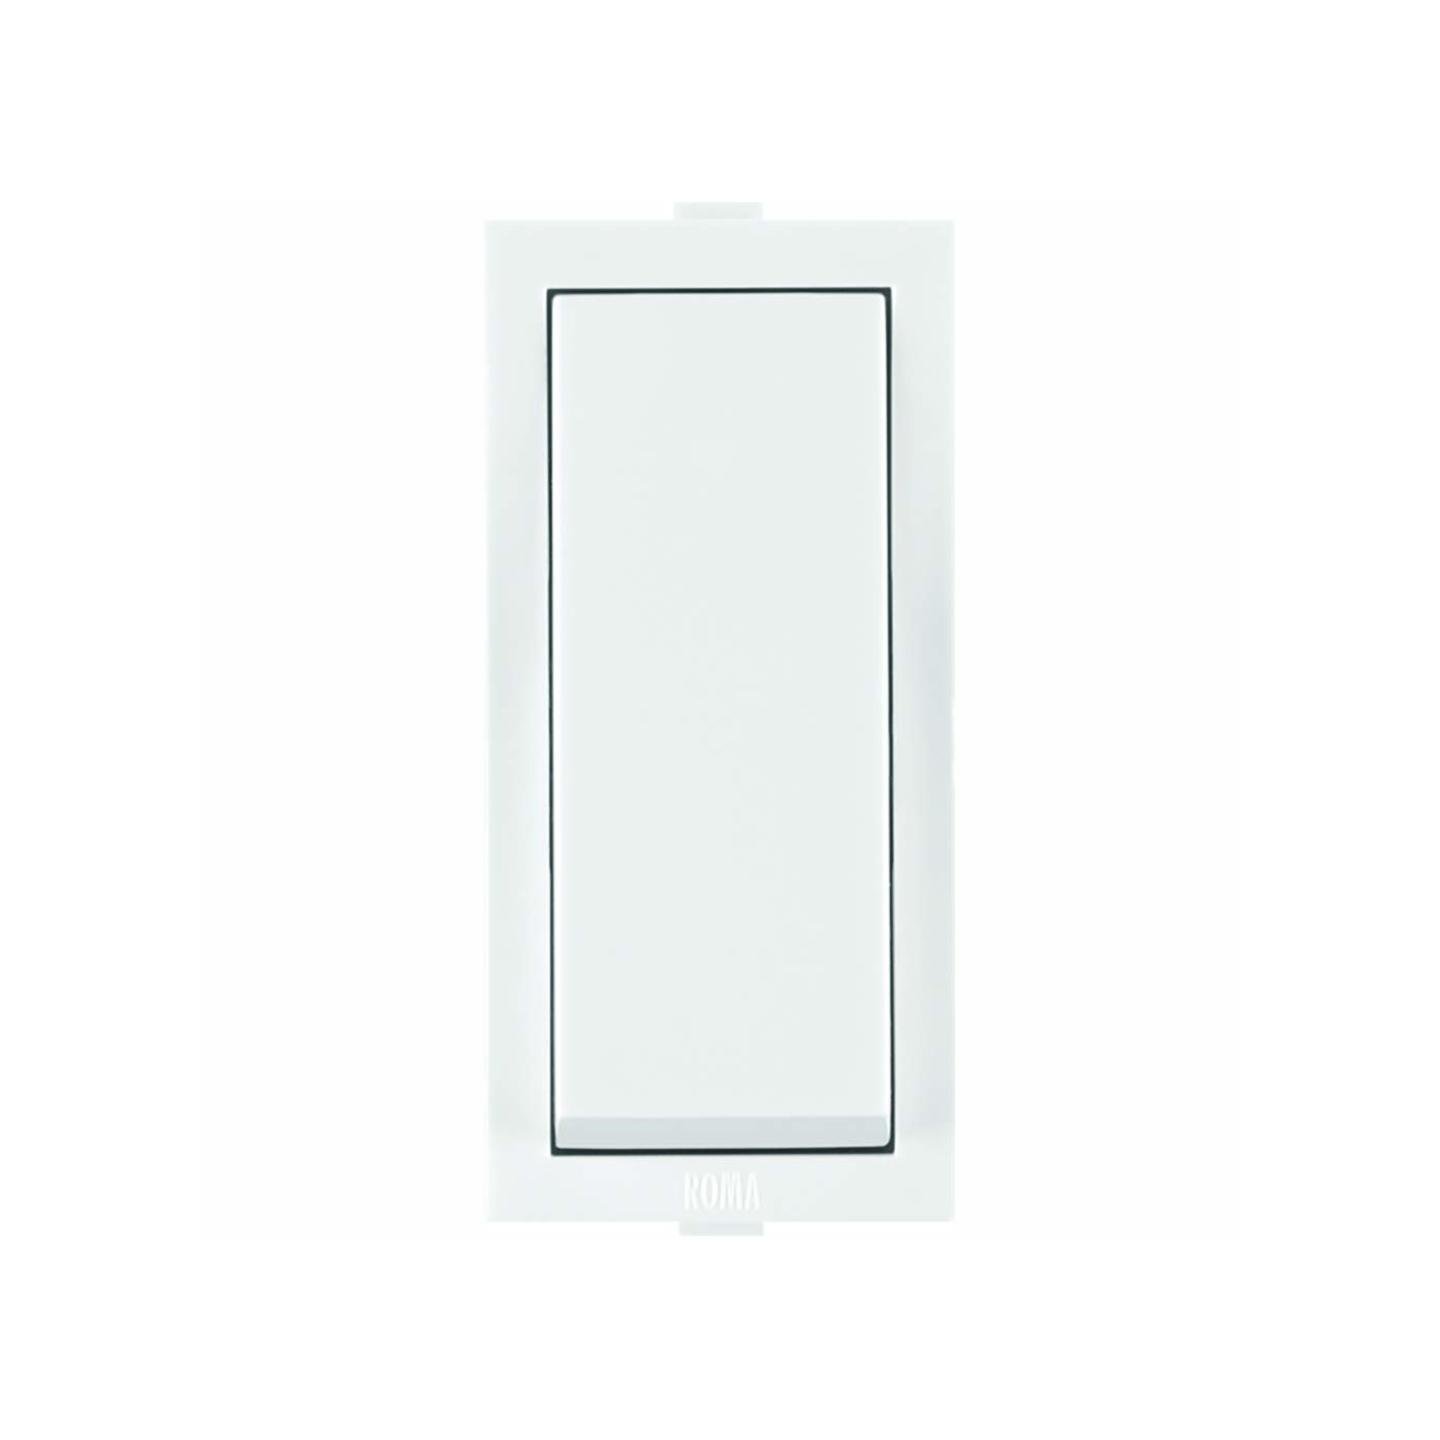 Anchor by Panasonic Polycarbonate Roma One Way Switch 6 Amp White, Pack of 10